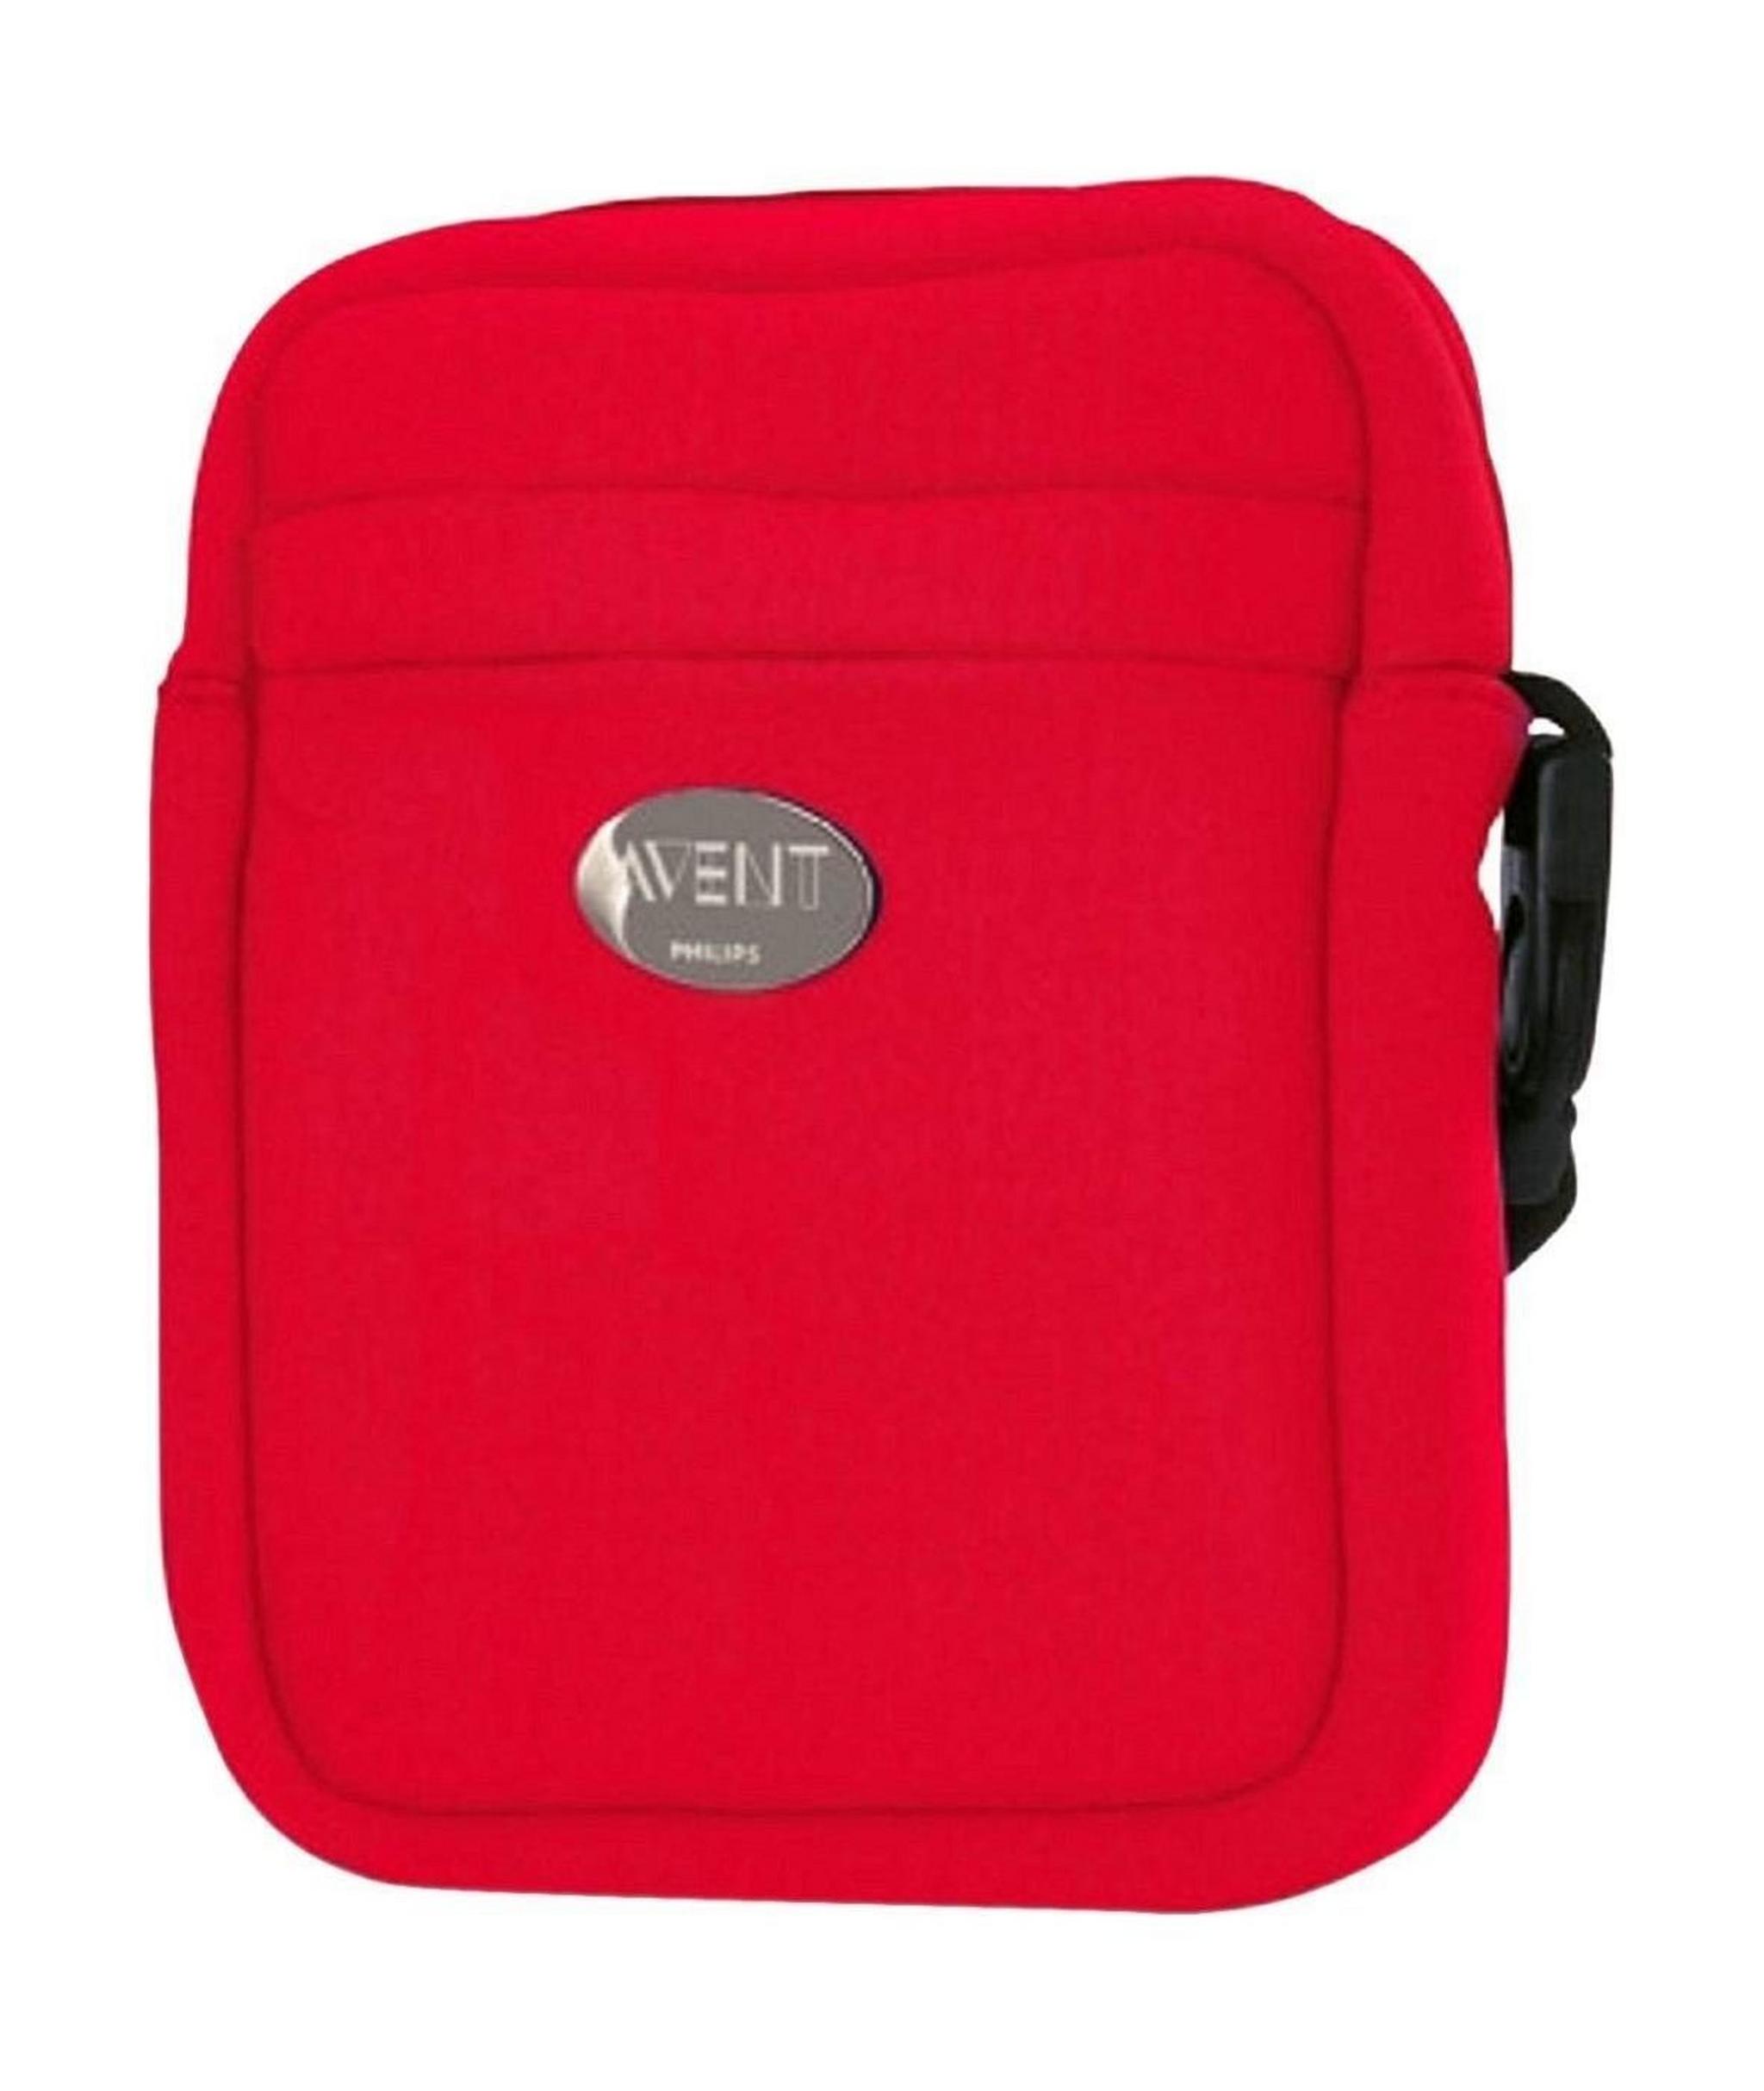 Philips Avent Thermal Baby Bottle Bag - Red